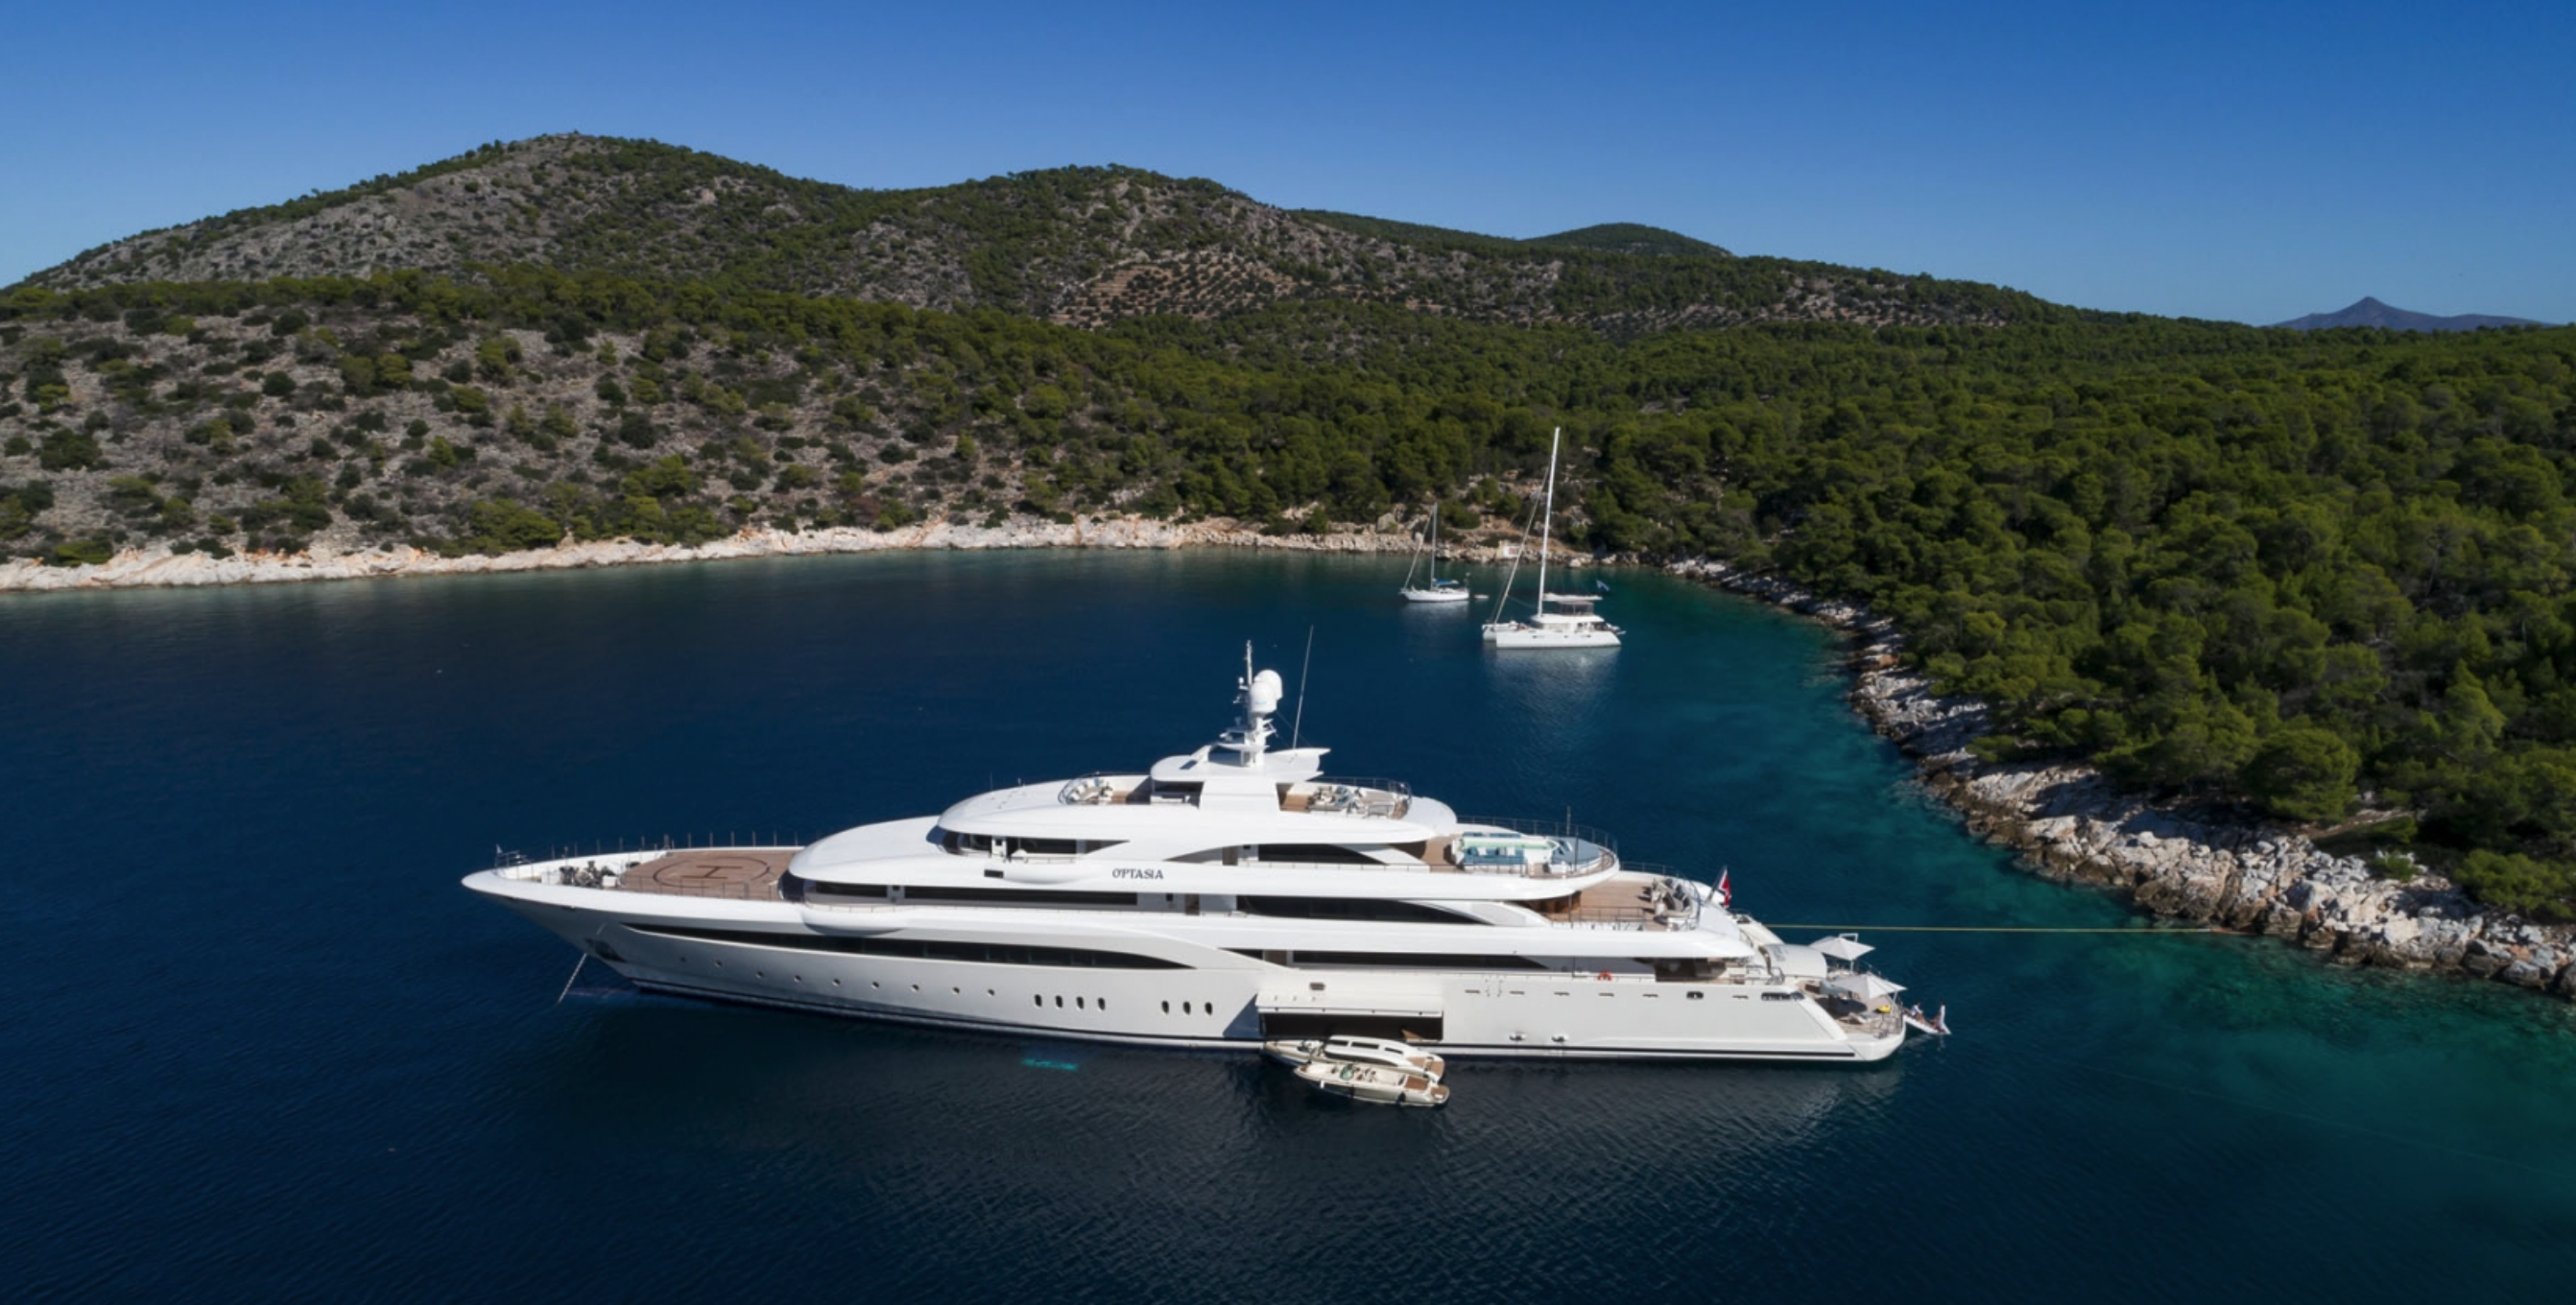 O’Ptasia - Yacht Charter Sivota & Boat hire in East Mediterranean 1